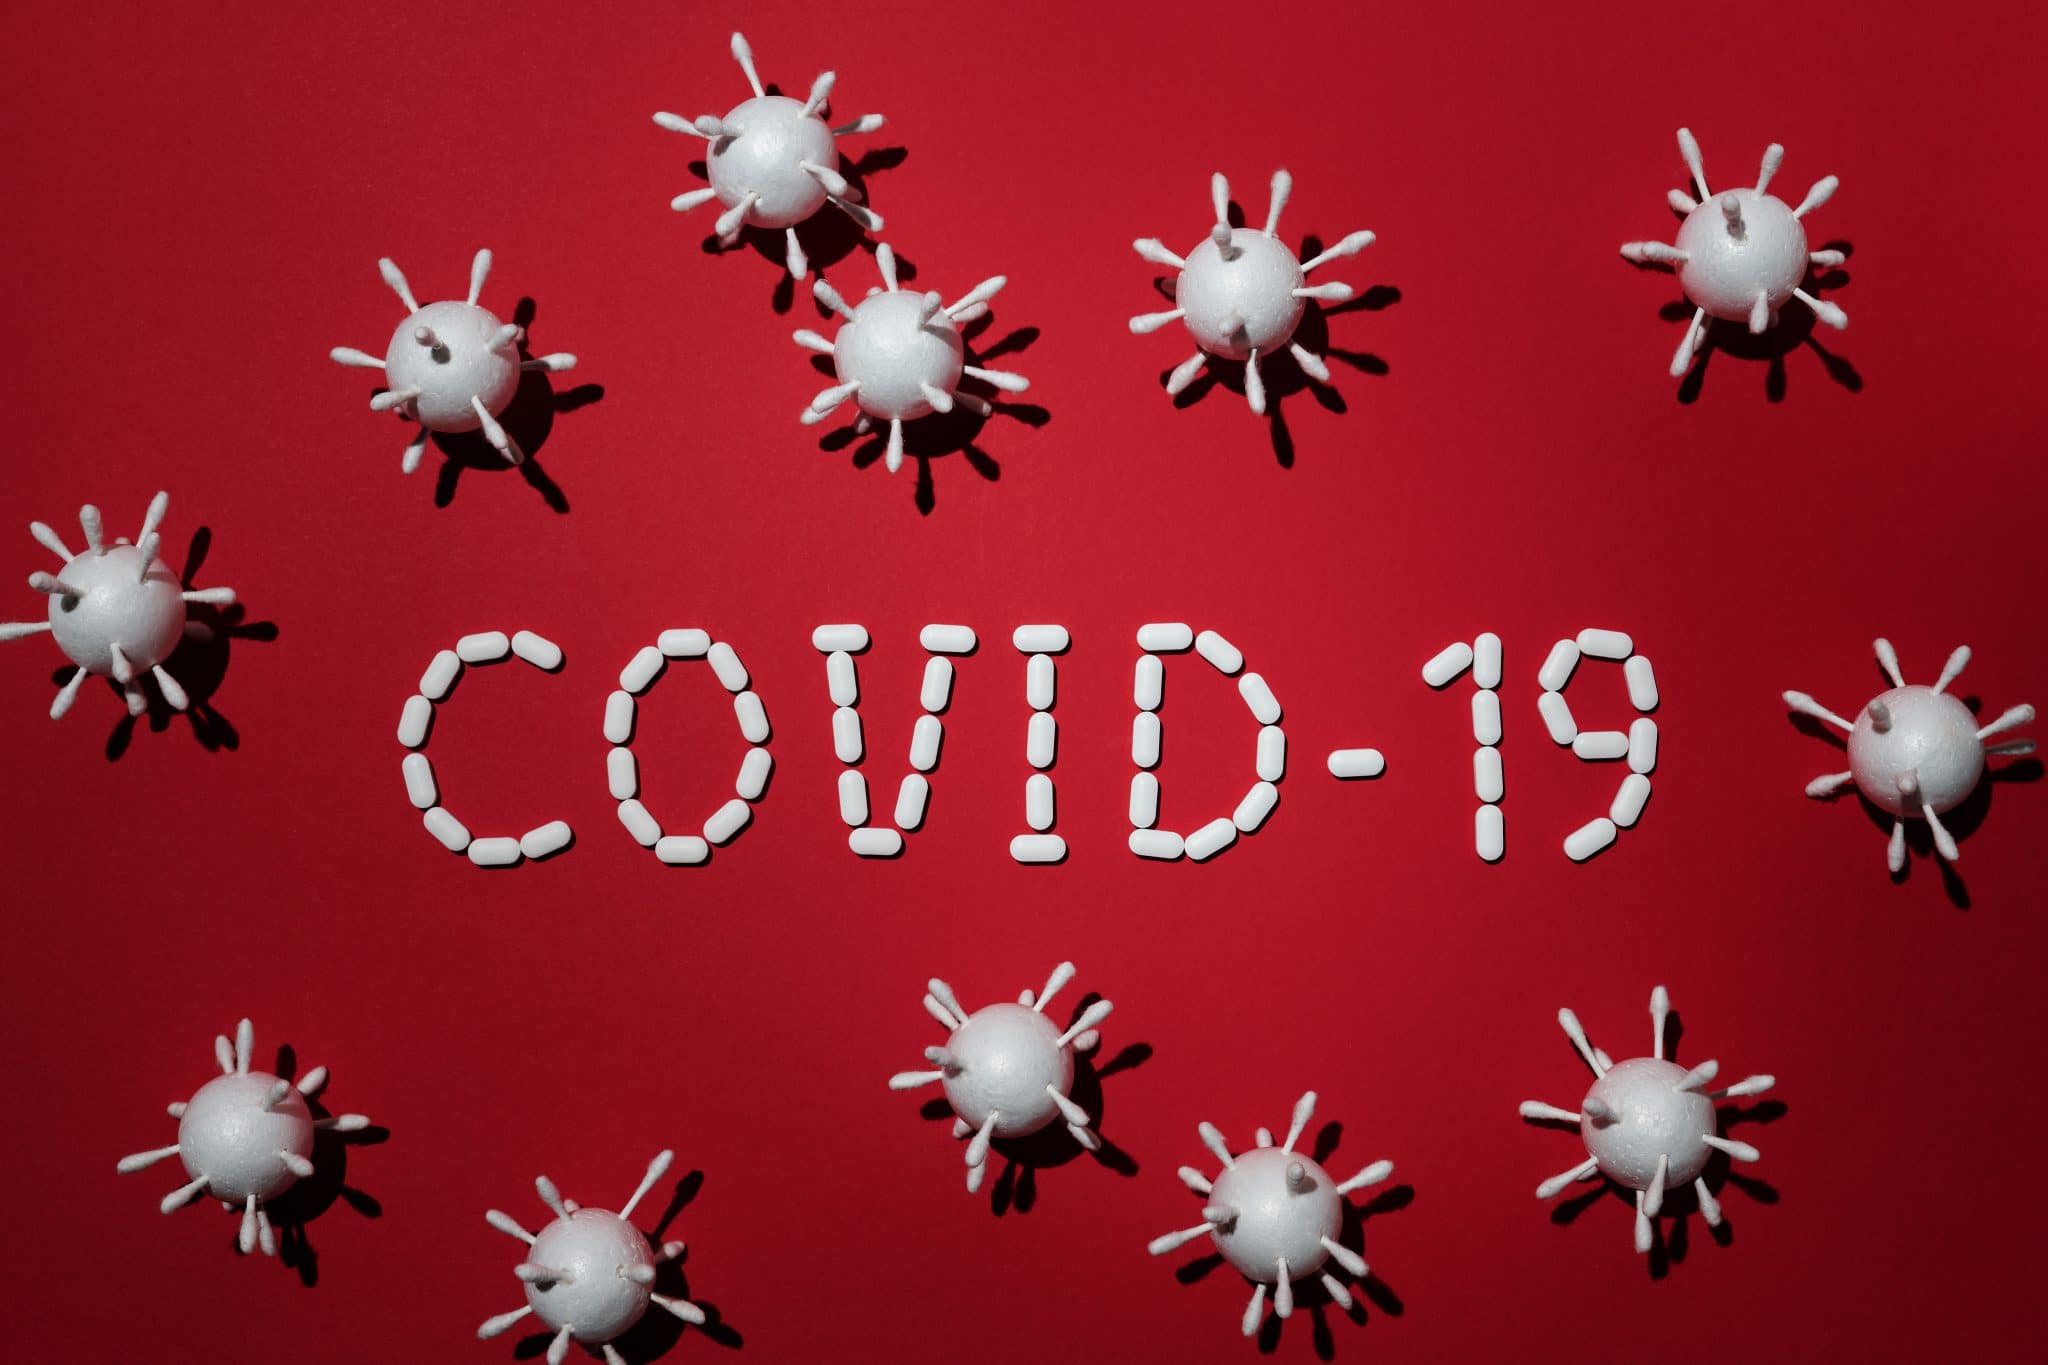 COVID-10 spelled in white pills against red background